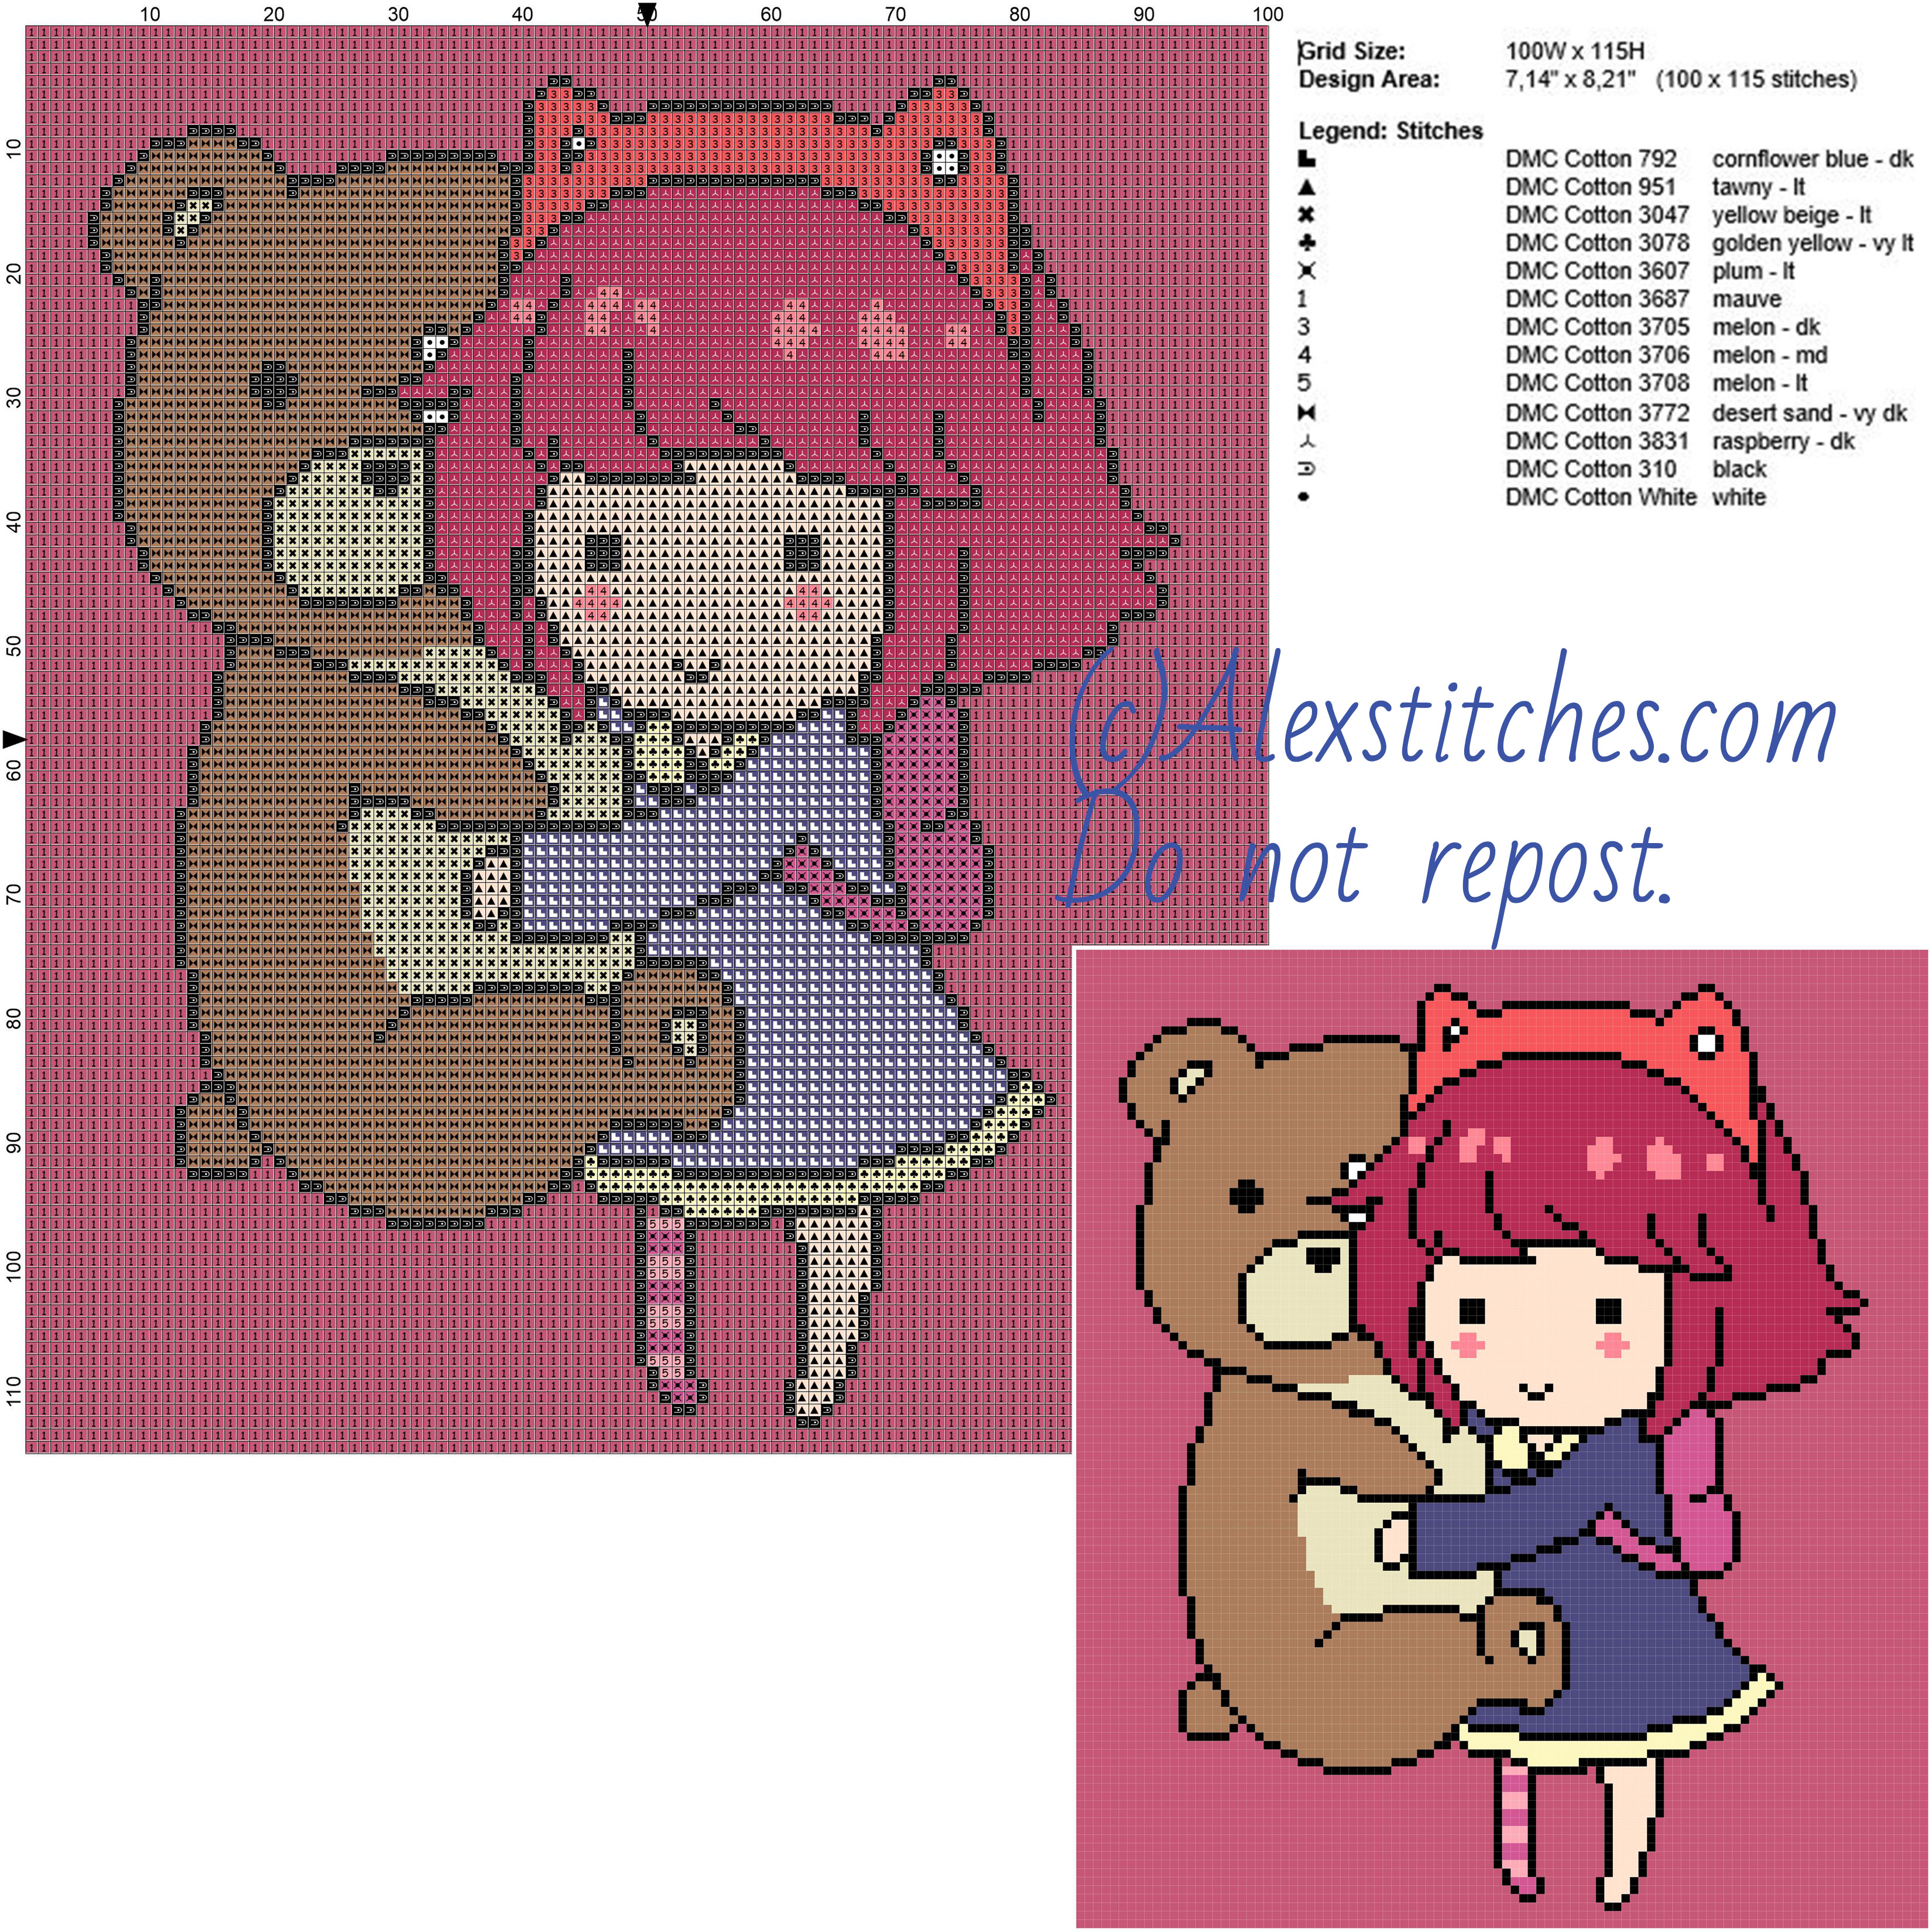 Annie and Tibbers League of Legends free cross stitch pattern 100x115 13 colors